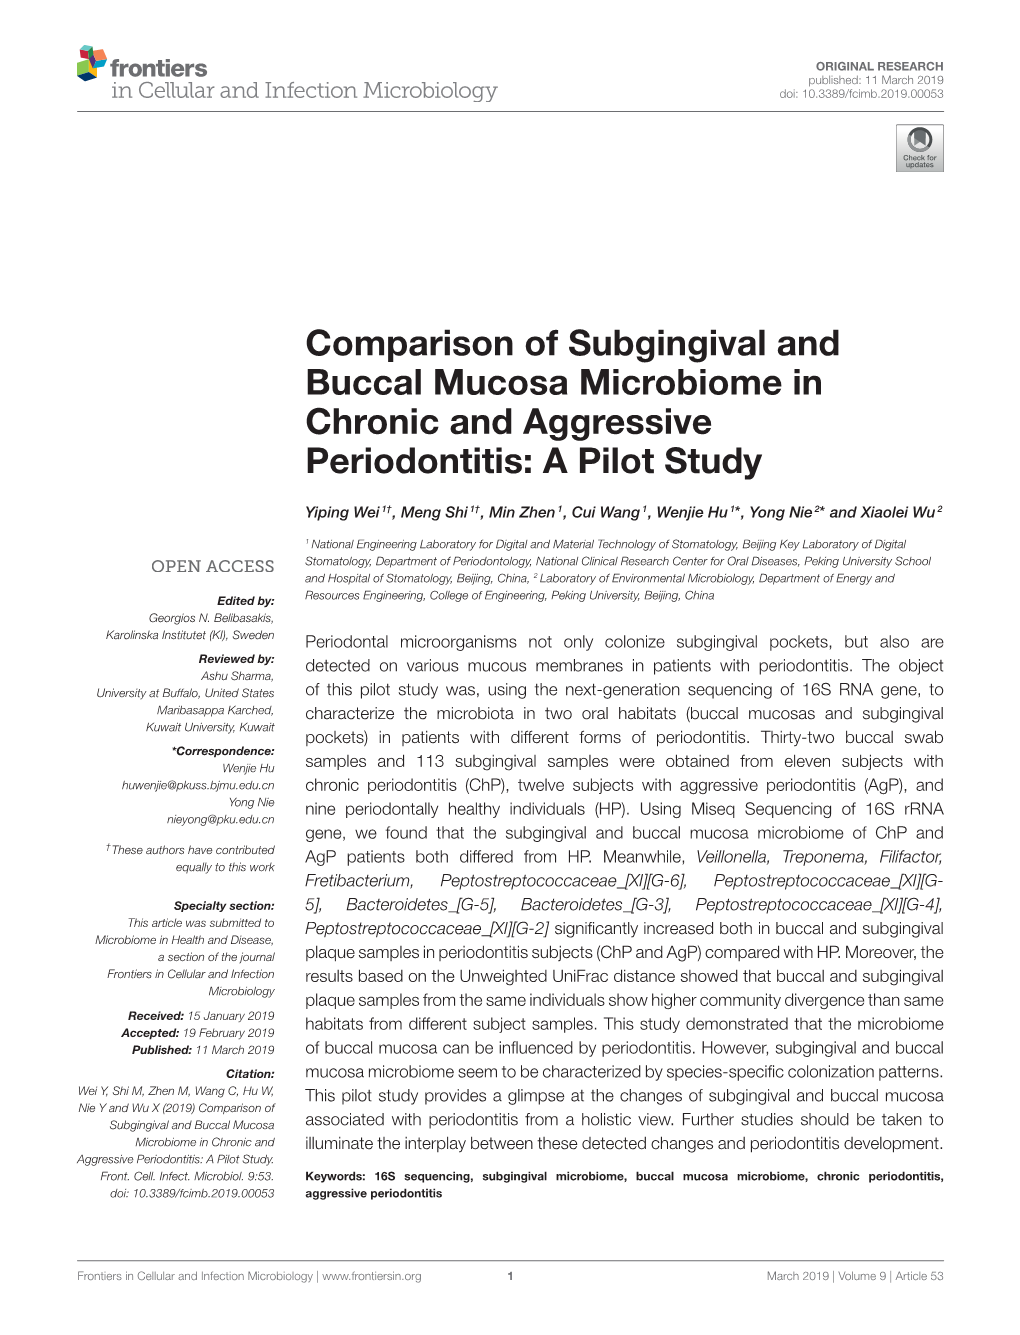 Comparison of Subgingival and Buccal Mucosa Microbiome in Chronic and Aggressive Periodontitis: a Pilot Study